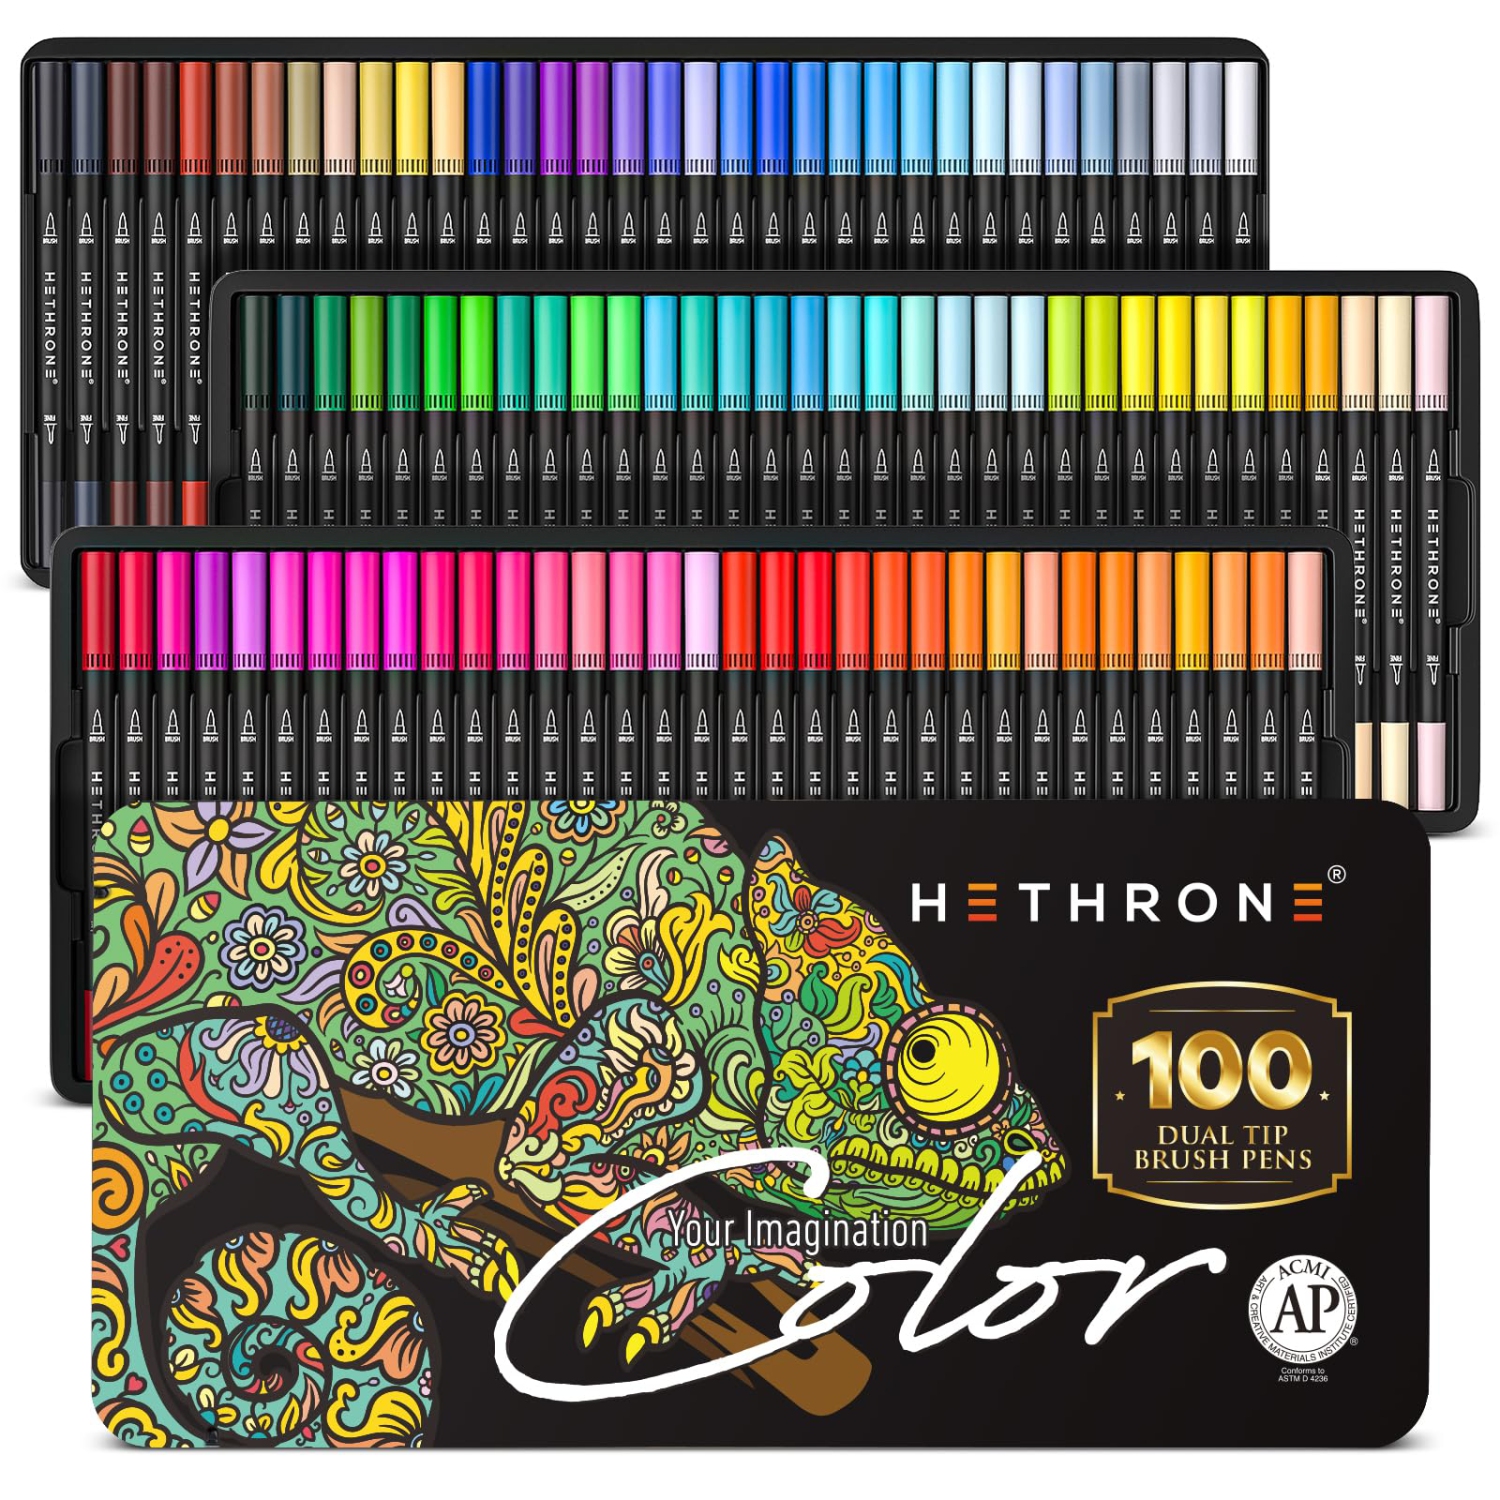 Colorful Creations: 100 Dual Tip Brush Pens Set for Adult Coloring, Calligraphy, Painting, Drawing, and Lettering - Fine Tip Markers with 100 Vibrant Colors